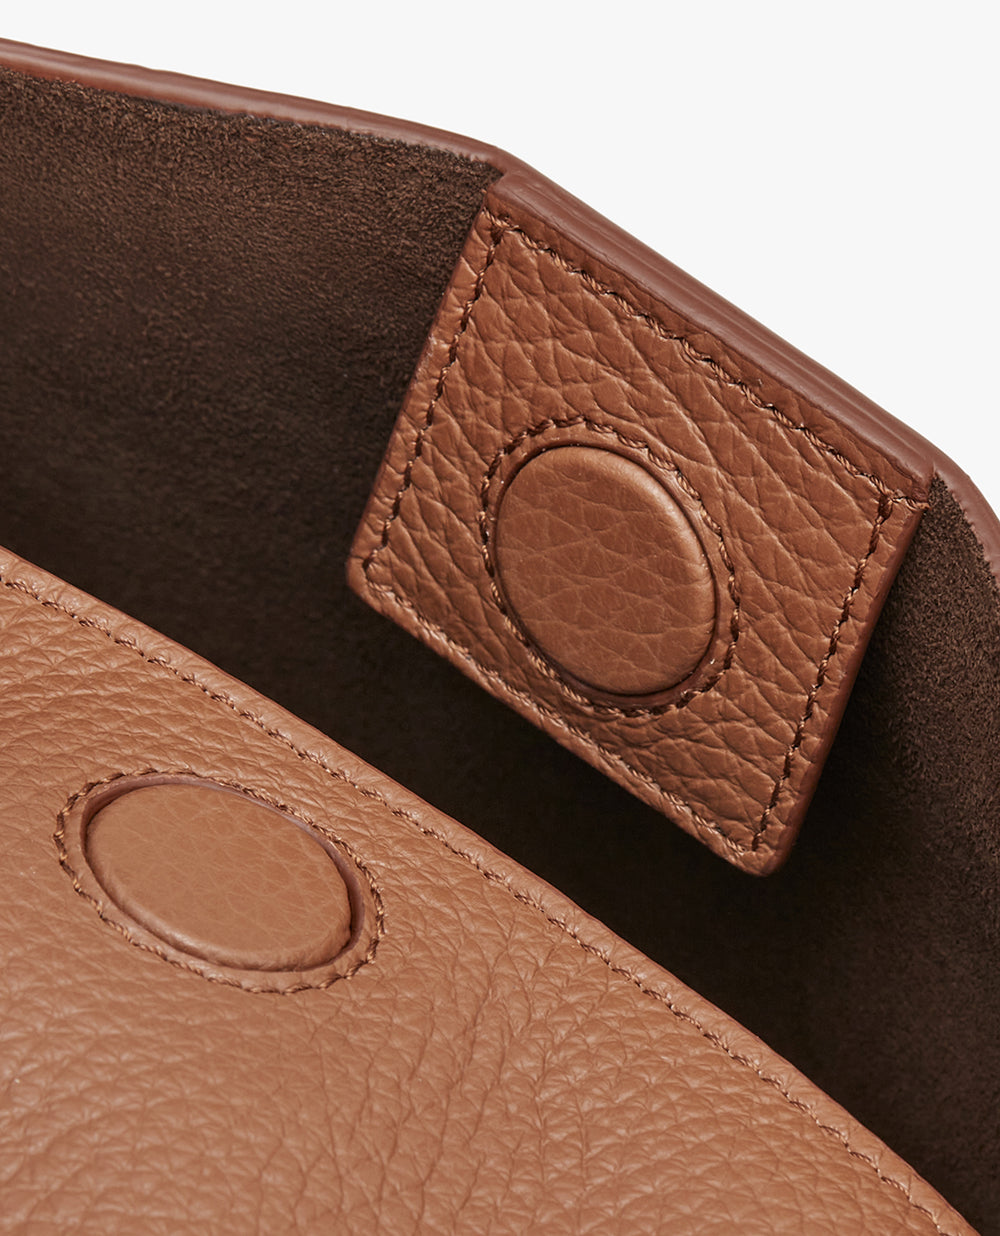 Close-up view of a textured handbag with a flap and button closure.